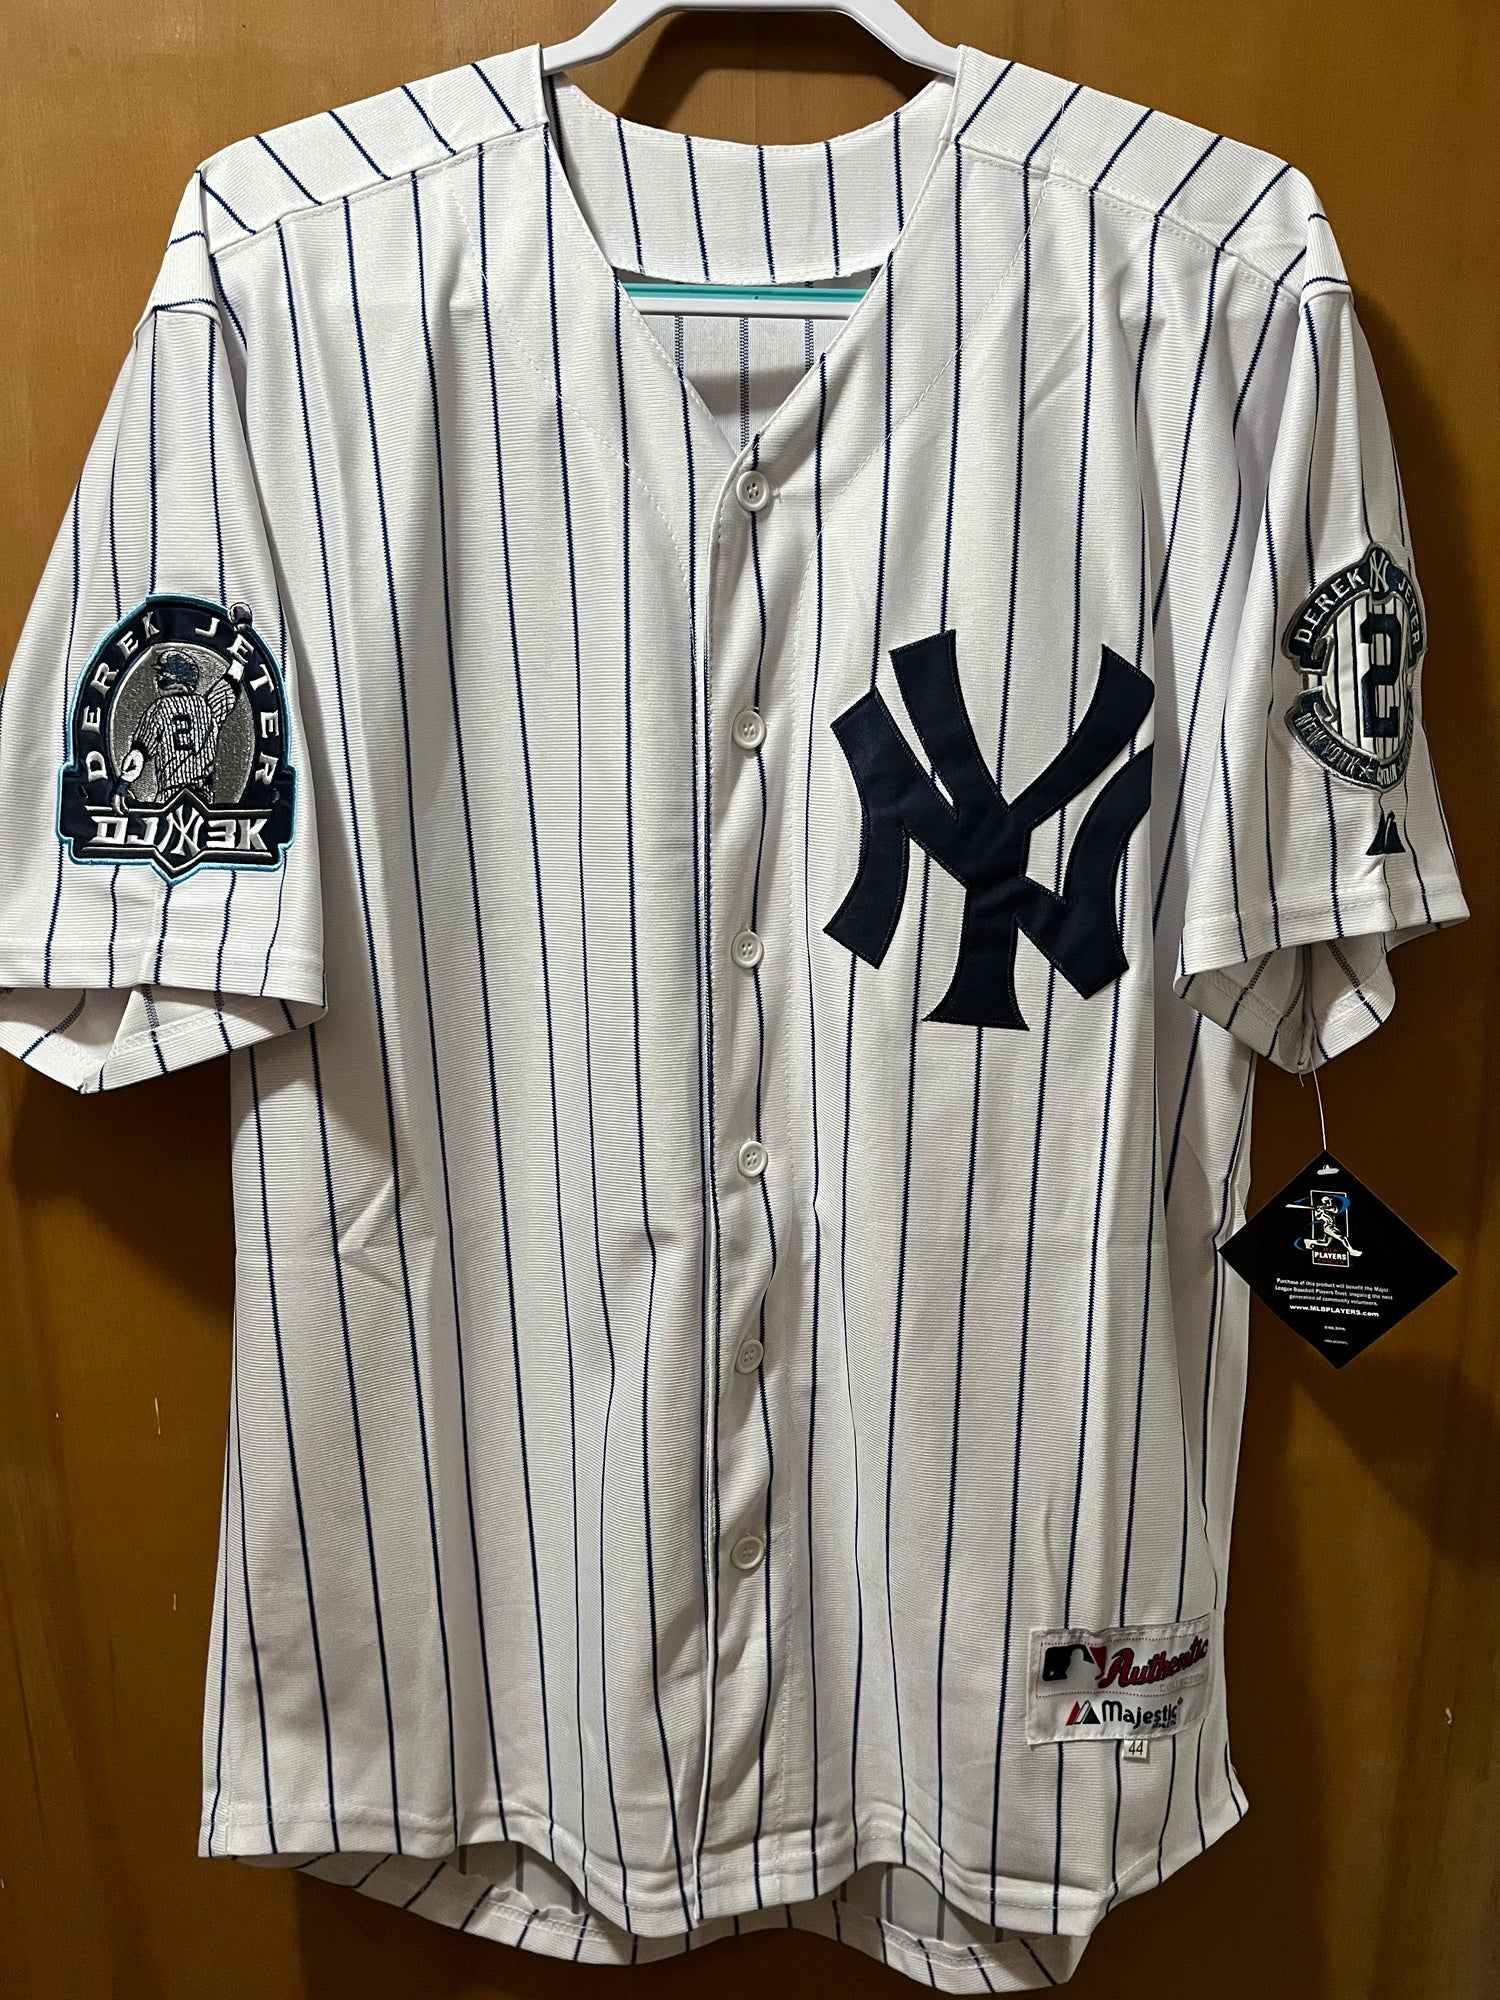 Derek Jeter #2 New York Yankees World Series Jersey Size 44 New With Tag